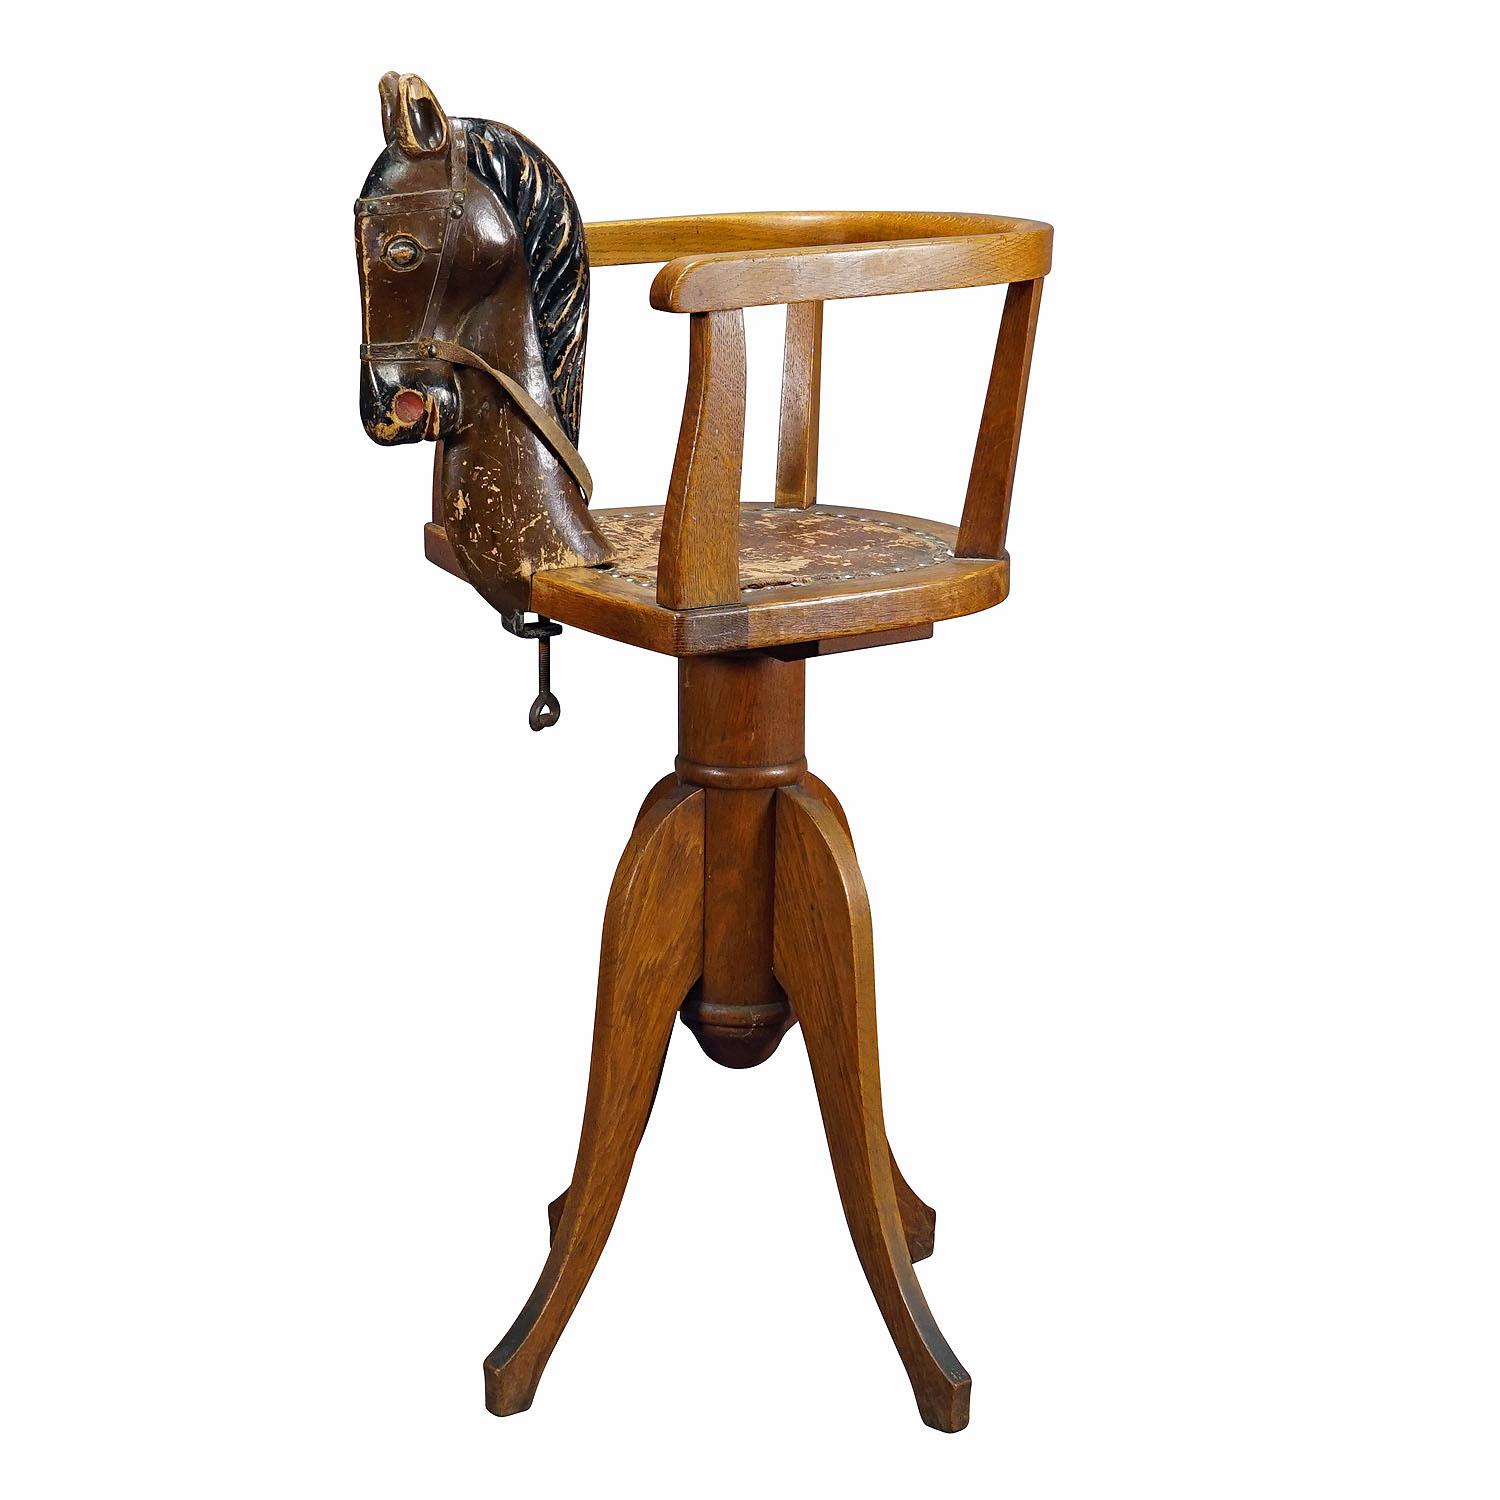 Antique Barber Chair for Children, Germany ca. 1920s

An antique barber shop children chair. With rotatable height adjustment and a wooden horse head which is attached to the front of  the seat. Good unrestored condition, height adjustment in